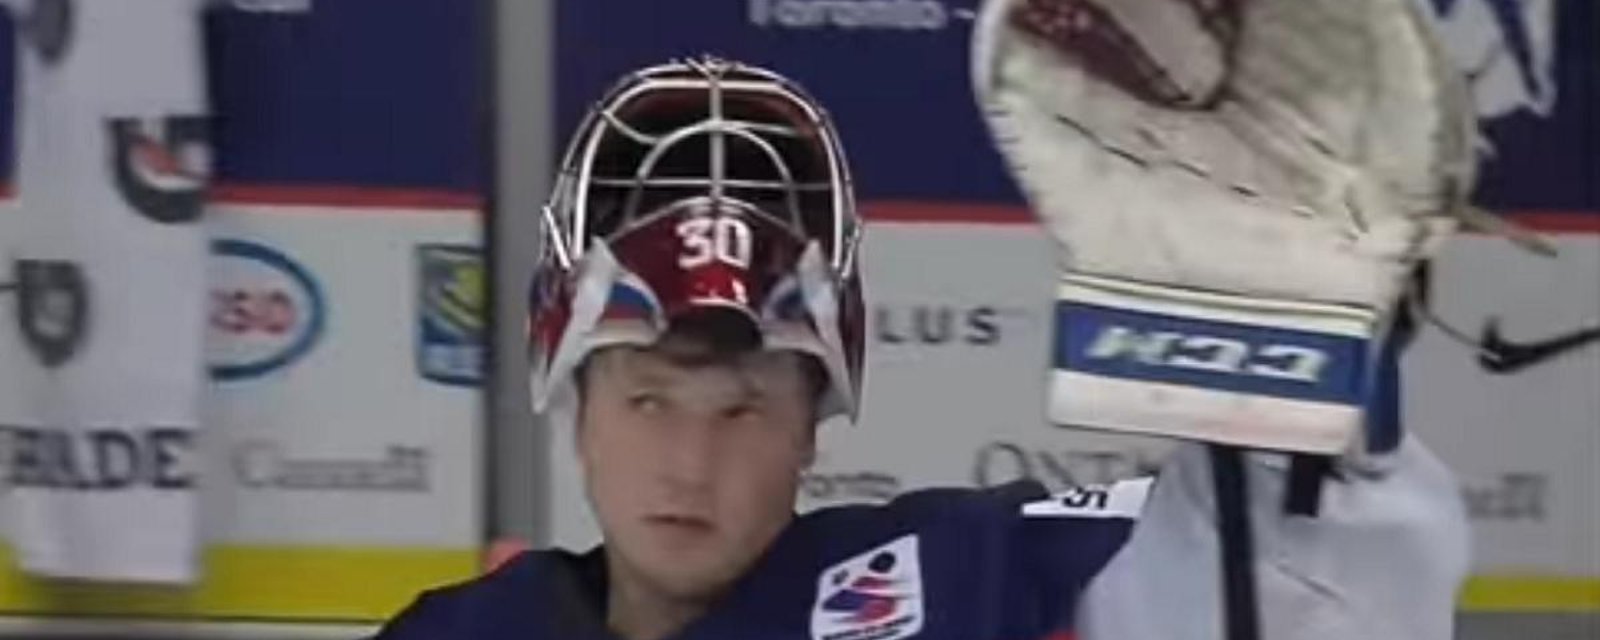 Throwback: Canadian crowd gives emotional salute to Denis Godla.